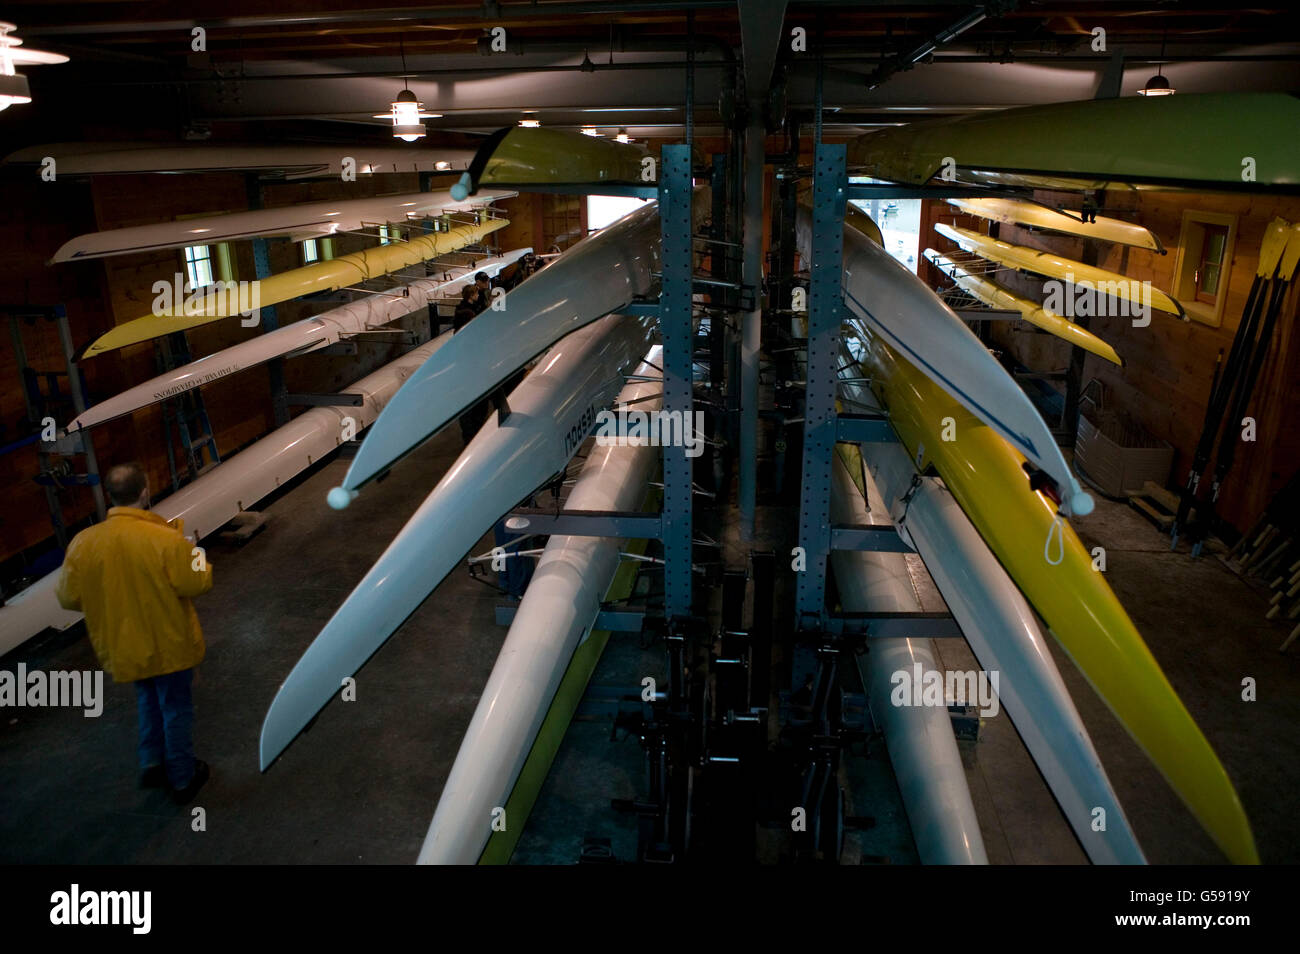 Boats lie in storage at the Peter Jay Sharp boathouse on Harlem River in New York, USA, 30 April 2005. Stock Photo